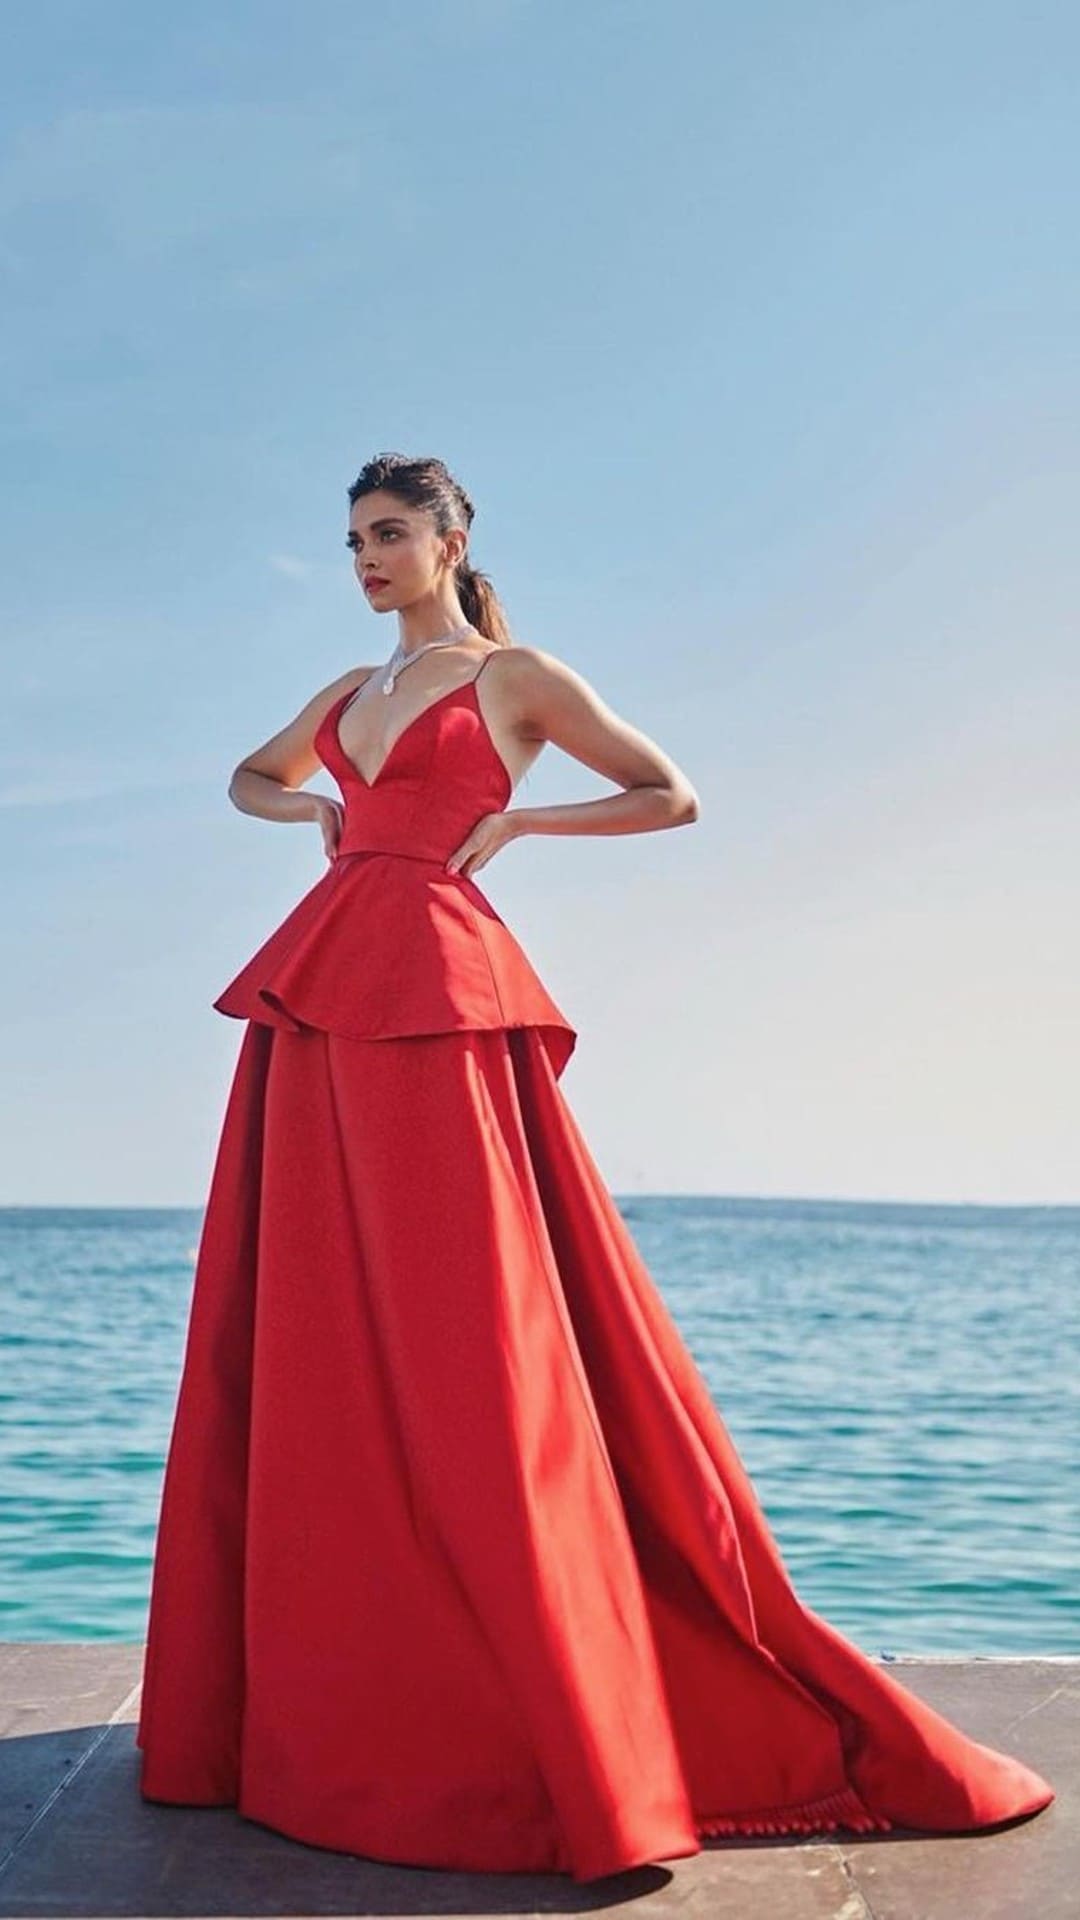 Deepika Padukone Enchants In A Red LV Gown At Cannes 2022